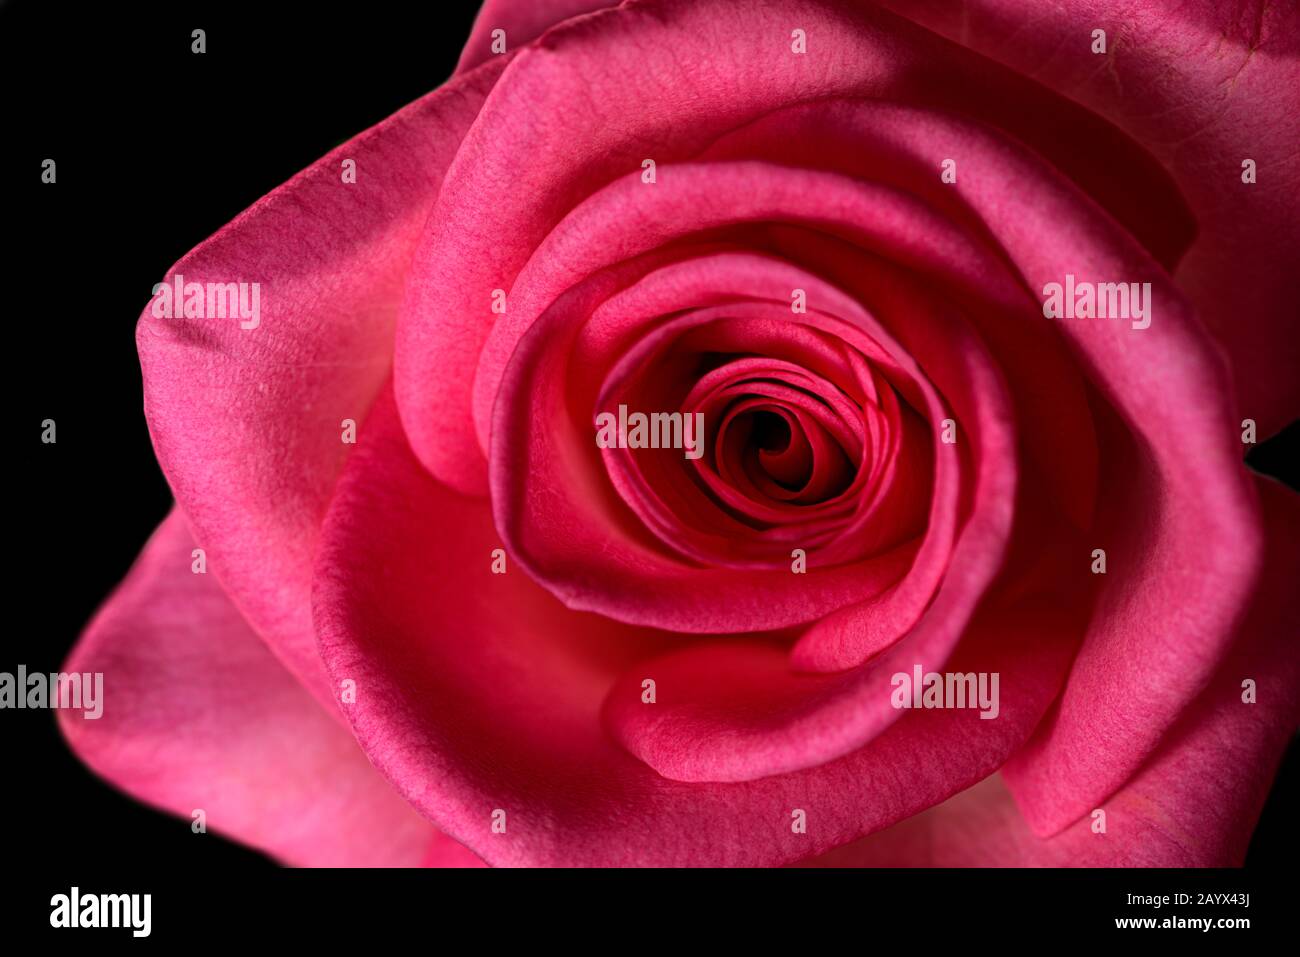 Single pink rose in full bloom on a black background Stock Photo